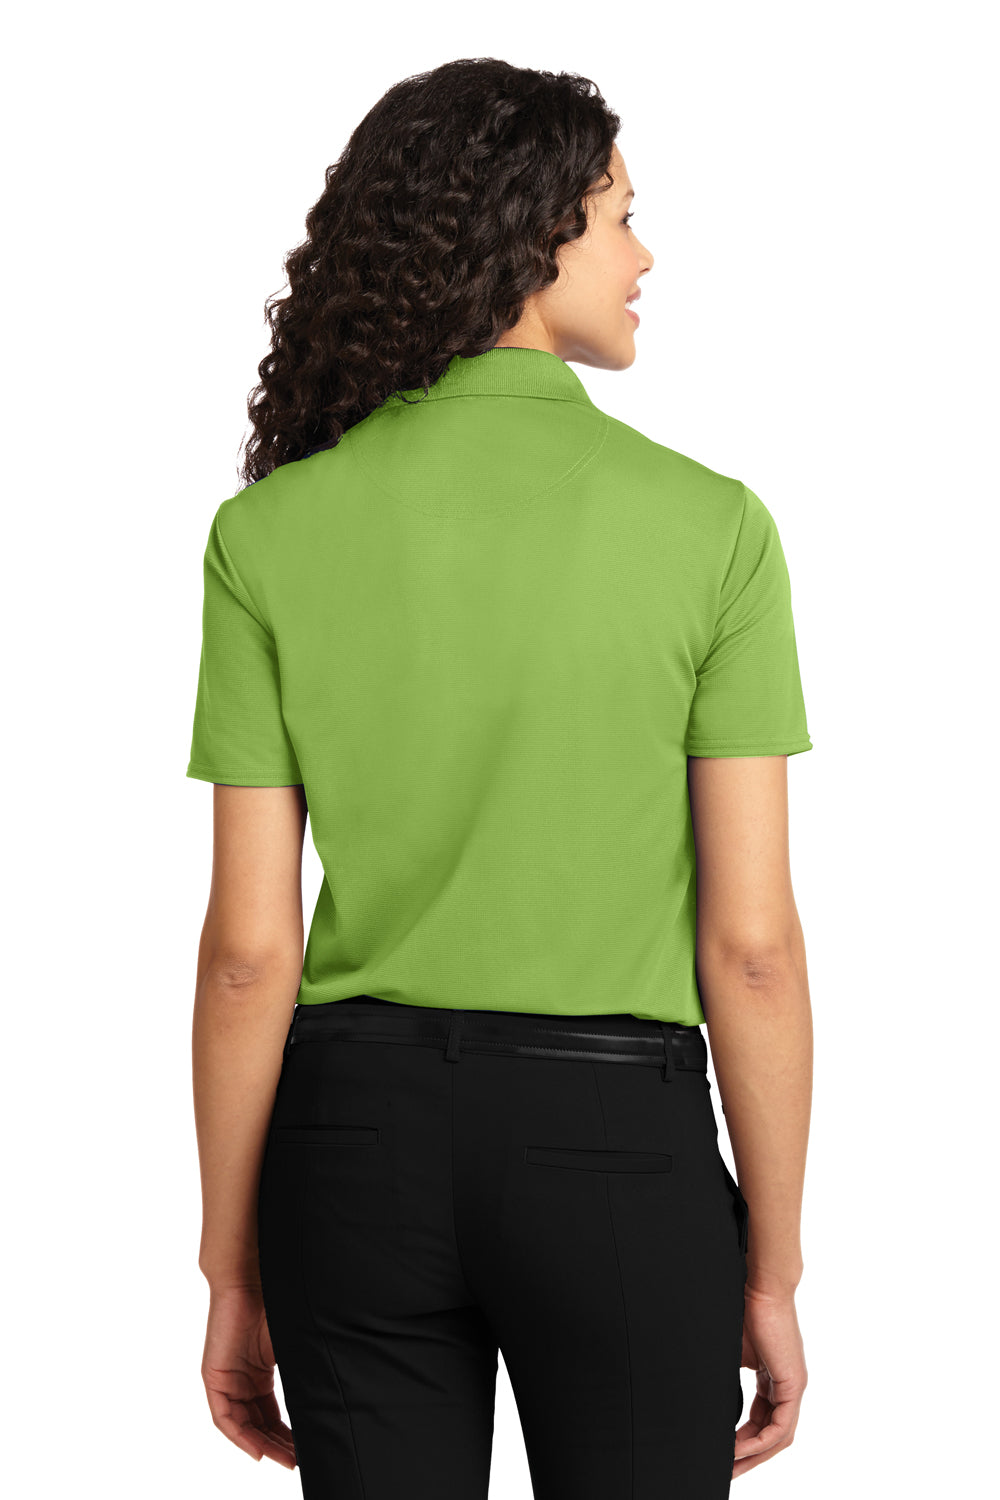 Port Authority L525 Womens Dry Zone Moisture Wicking Short Sleeve Polo Shirt Green Oasis Back